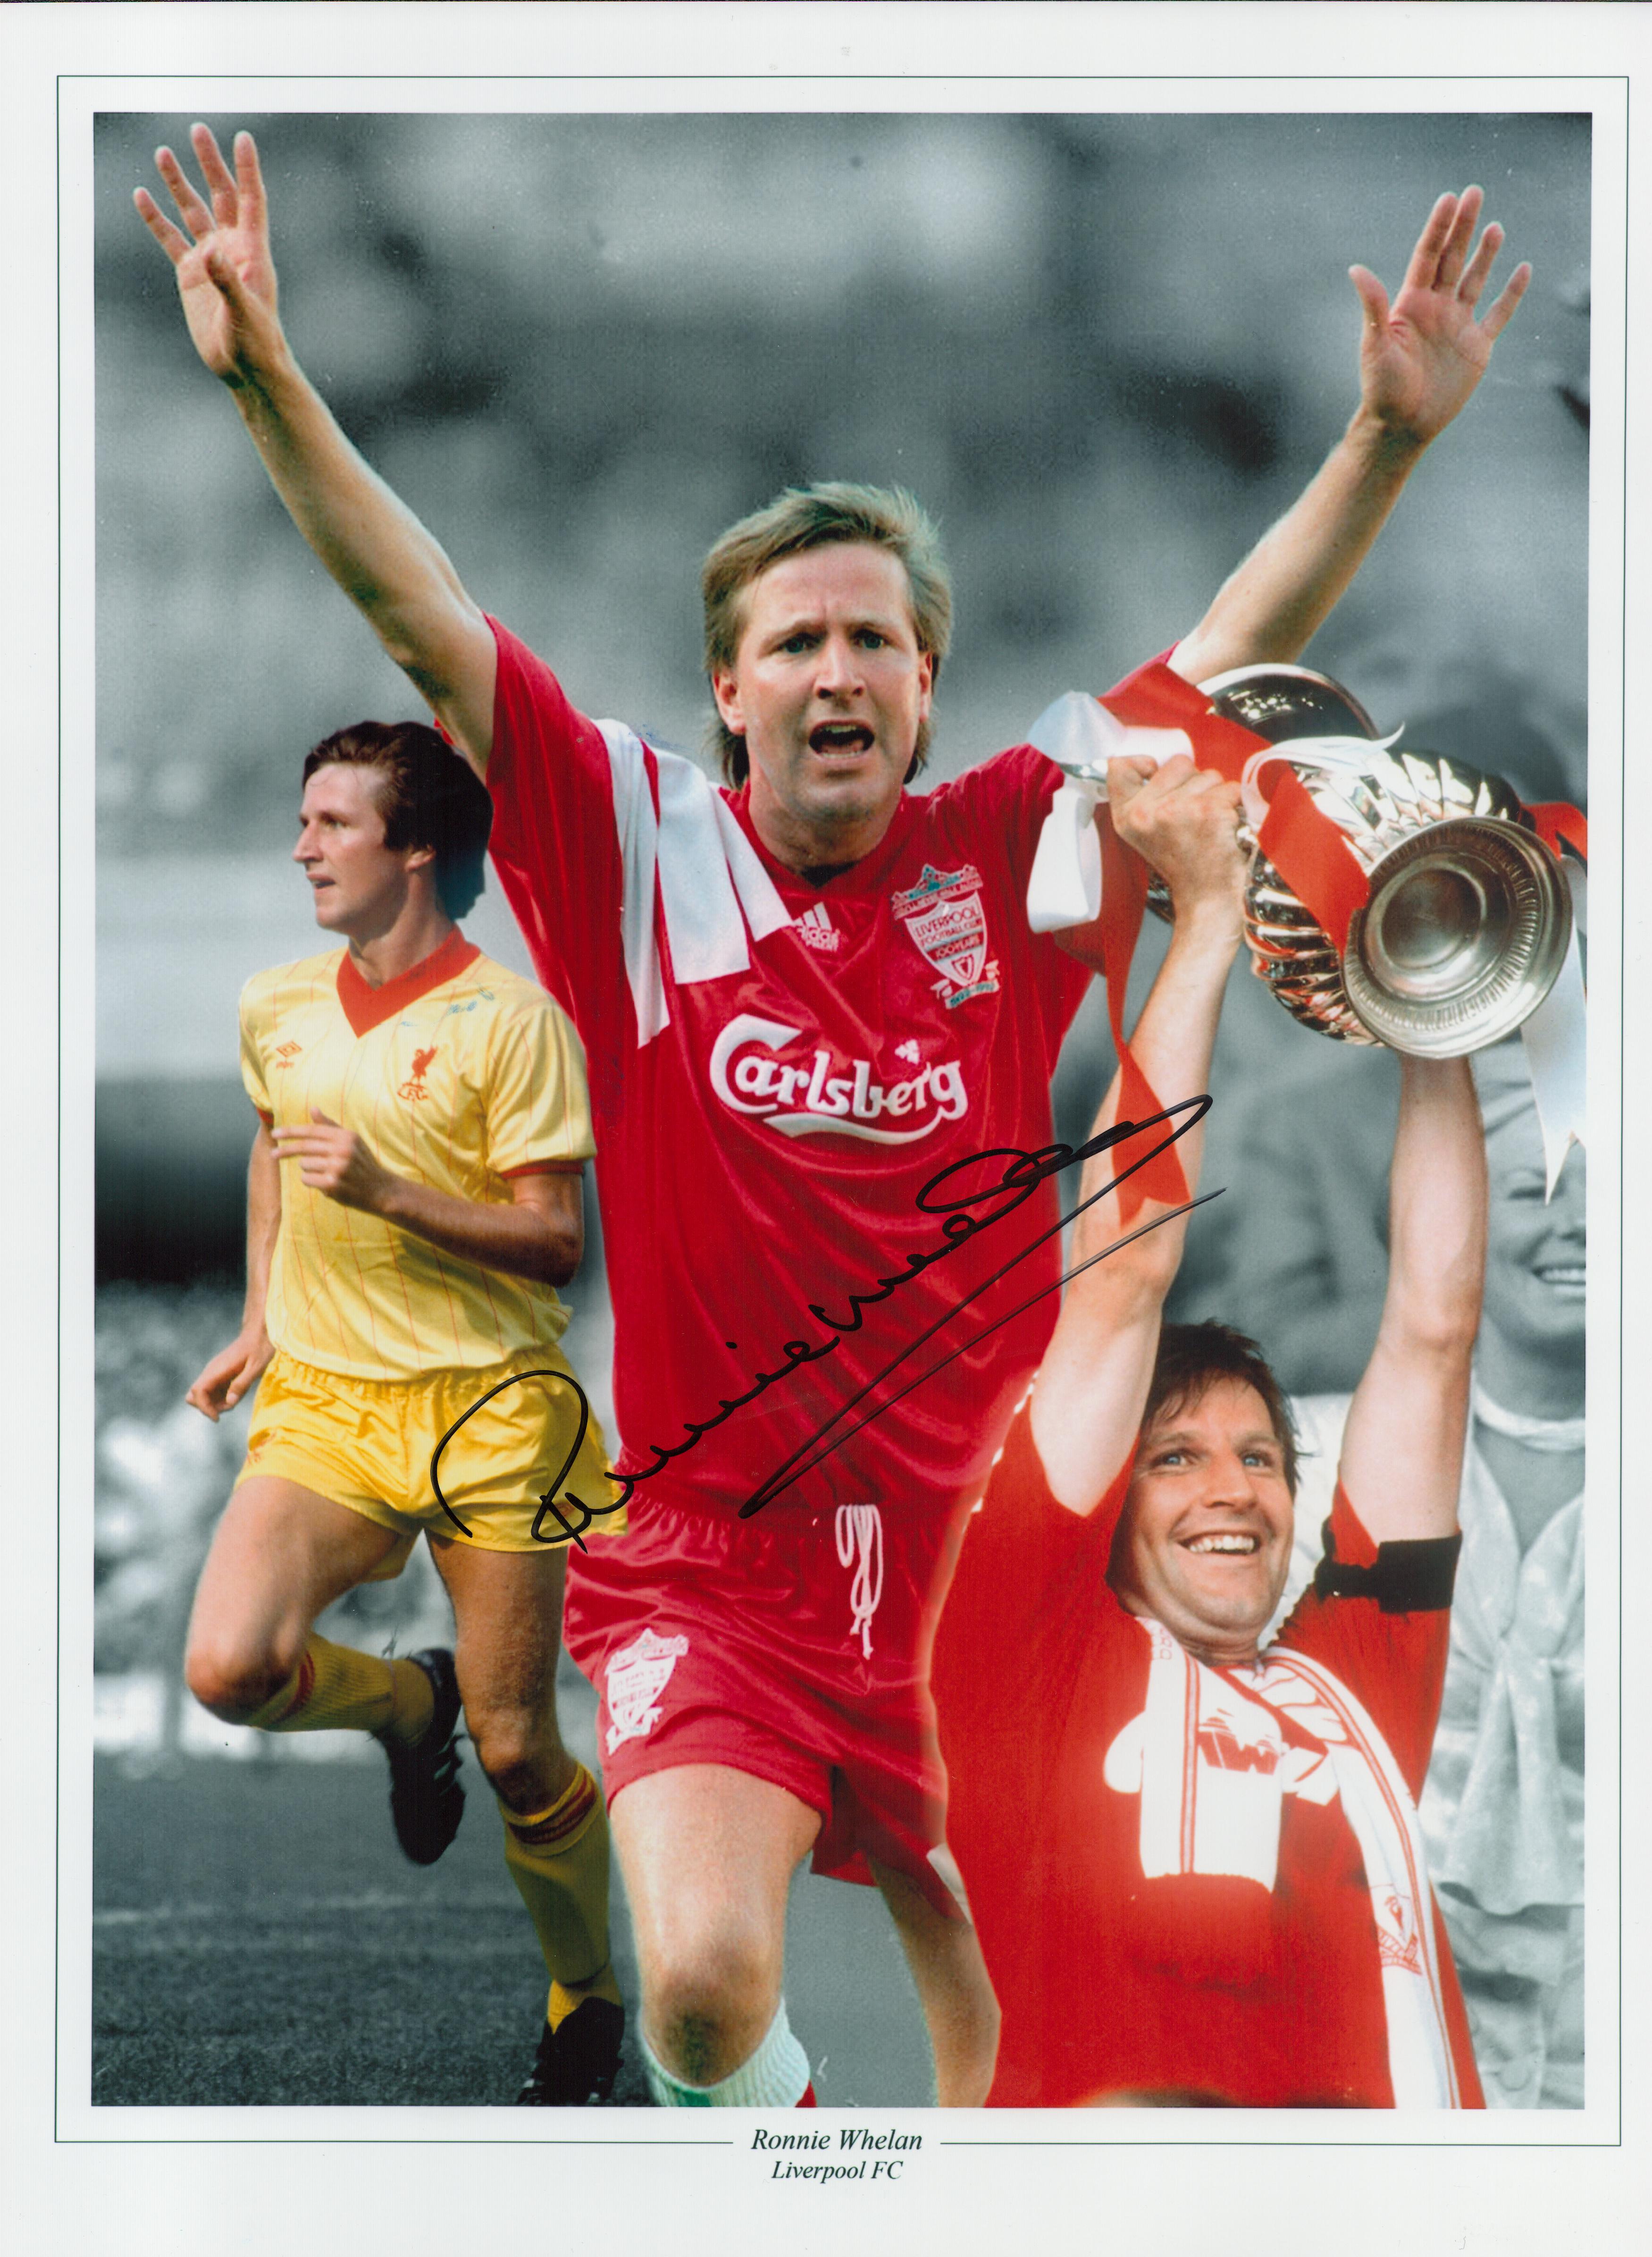 Football Ronne Whelan signed 16x12 Liverpool colour montage print. Good condition. All autographs